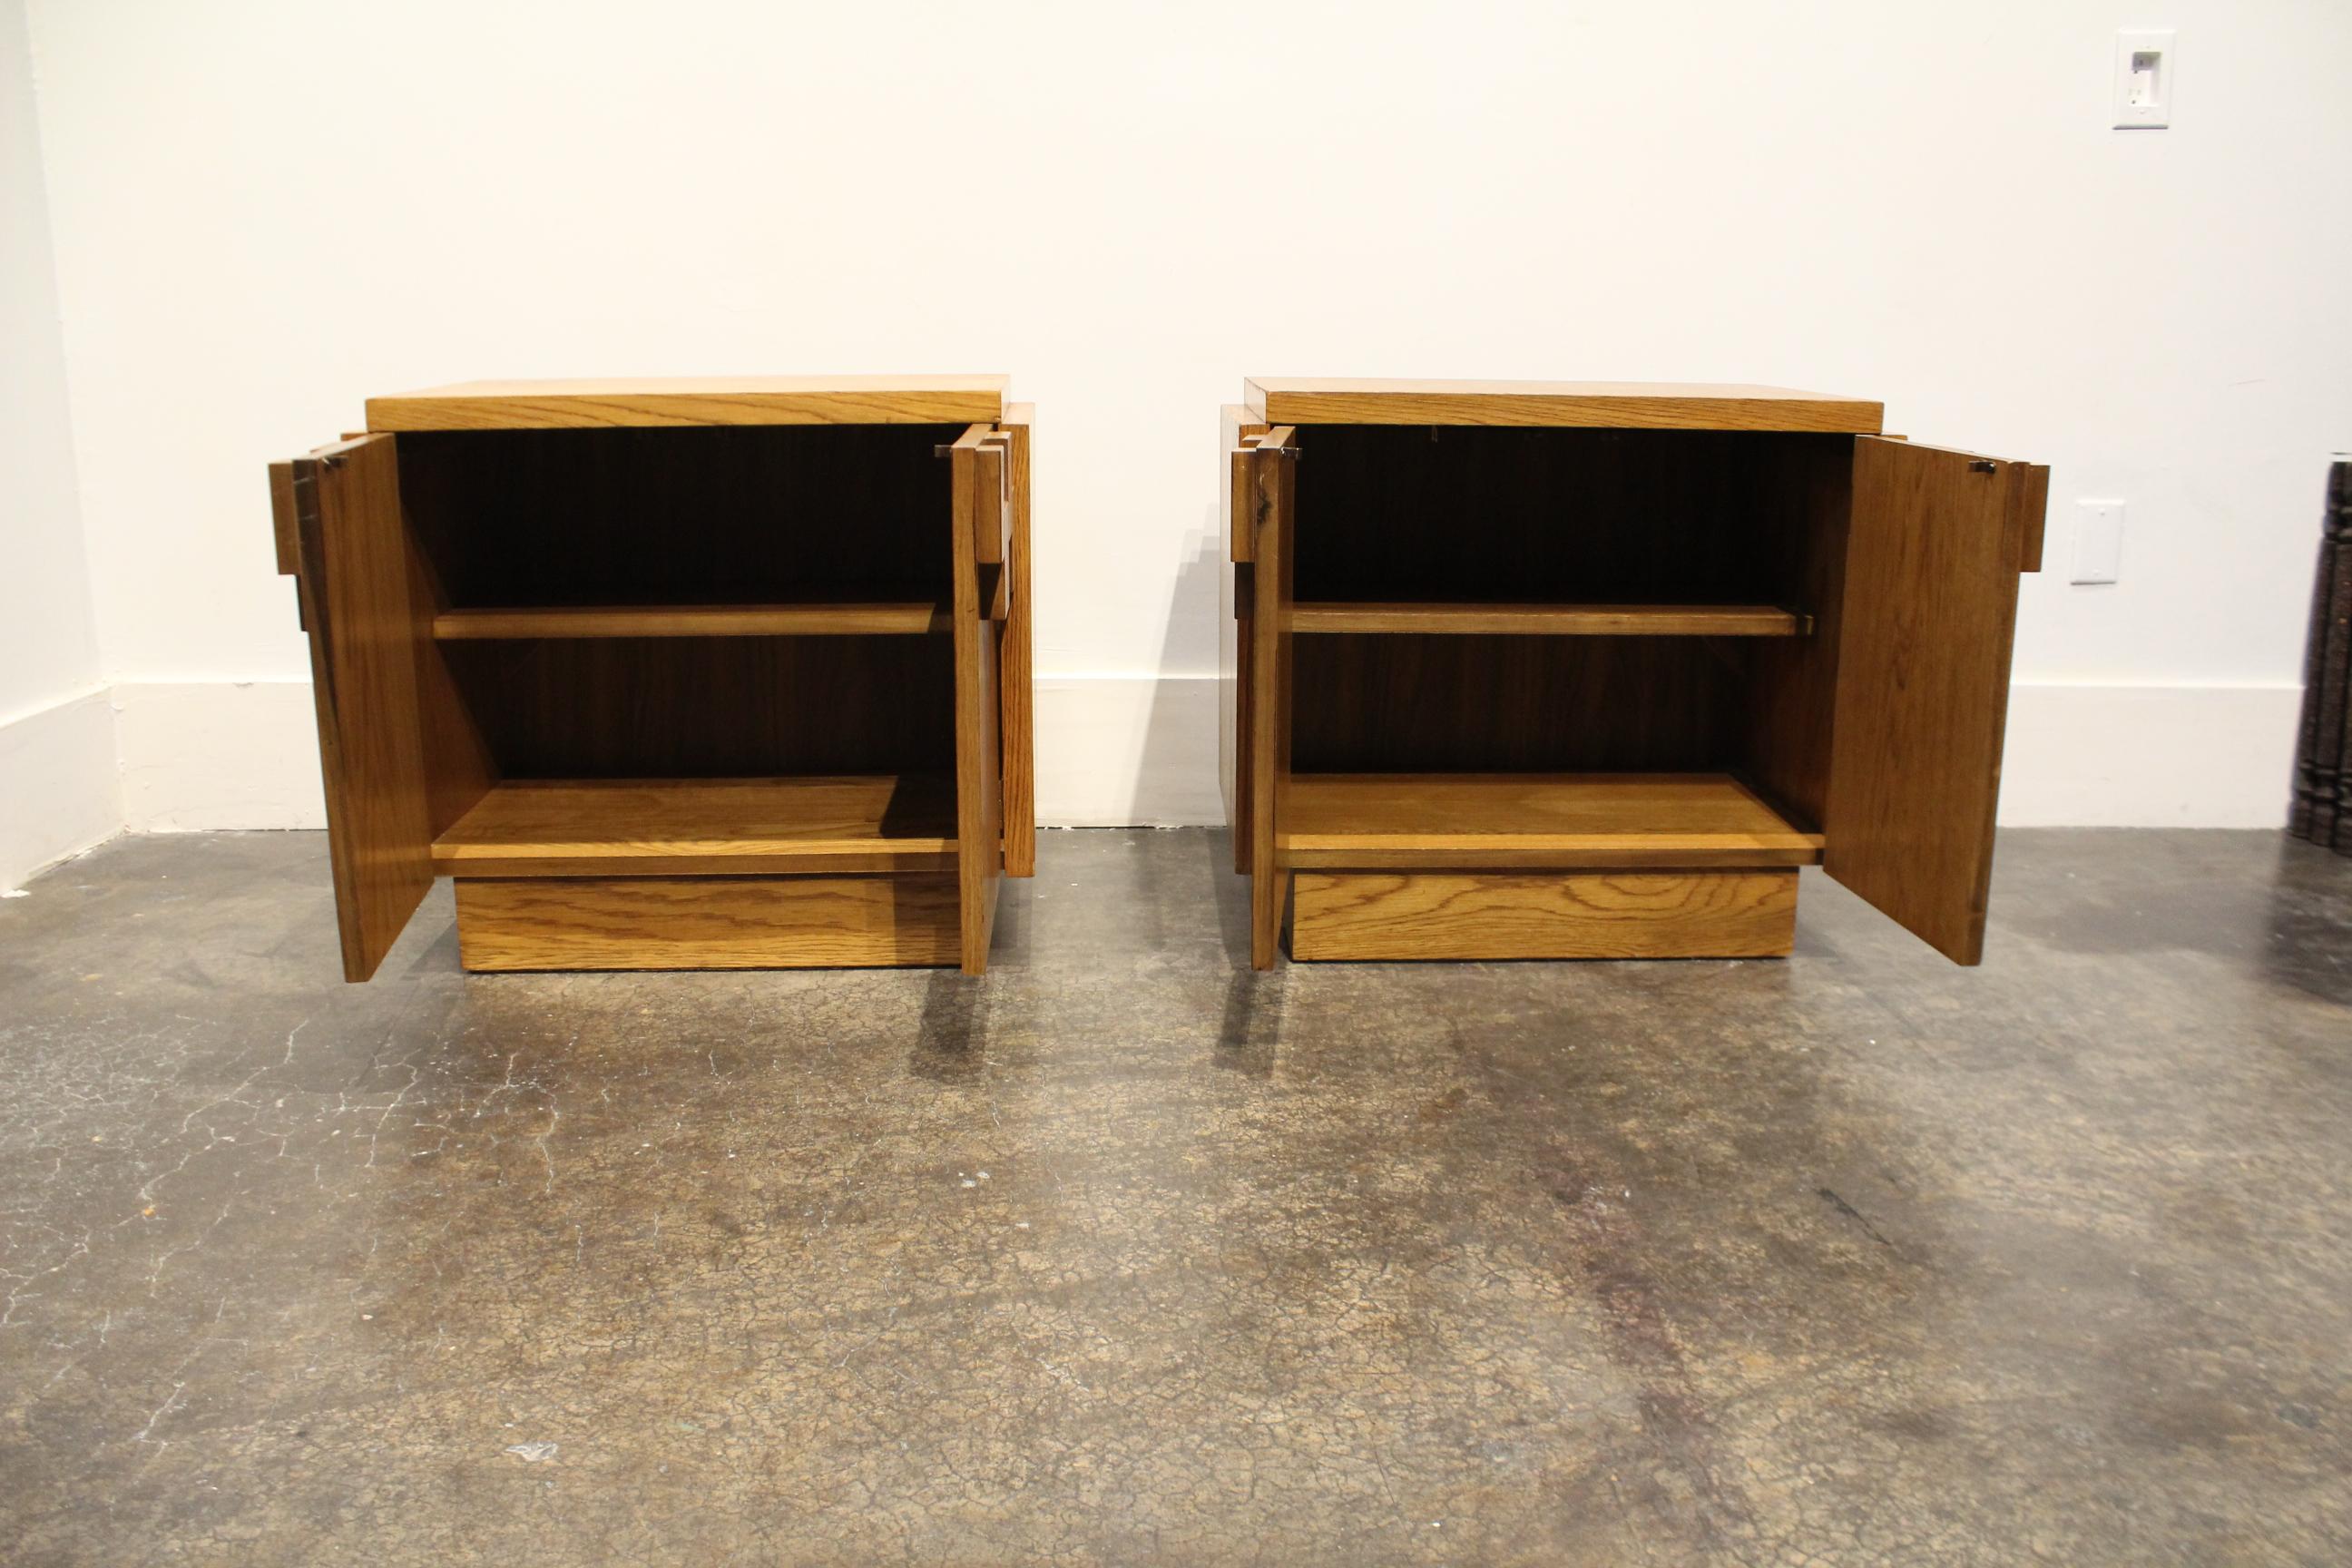 Pair of Oak 1970s Mid-Century Modern Brutalist Nightstands by Lane In Good Condition For Sale In Dallas, TX